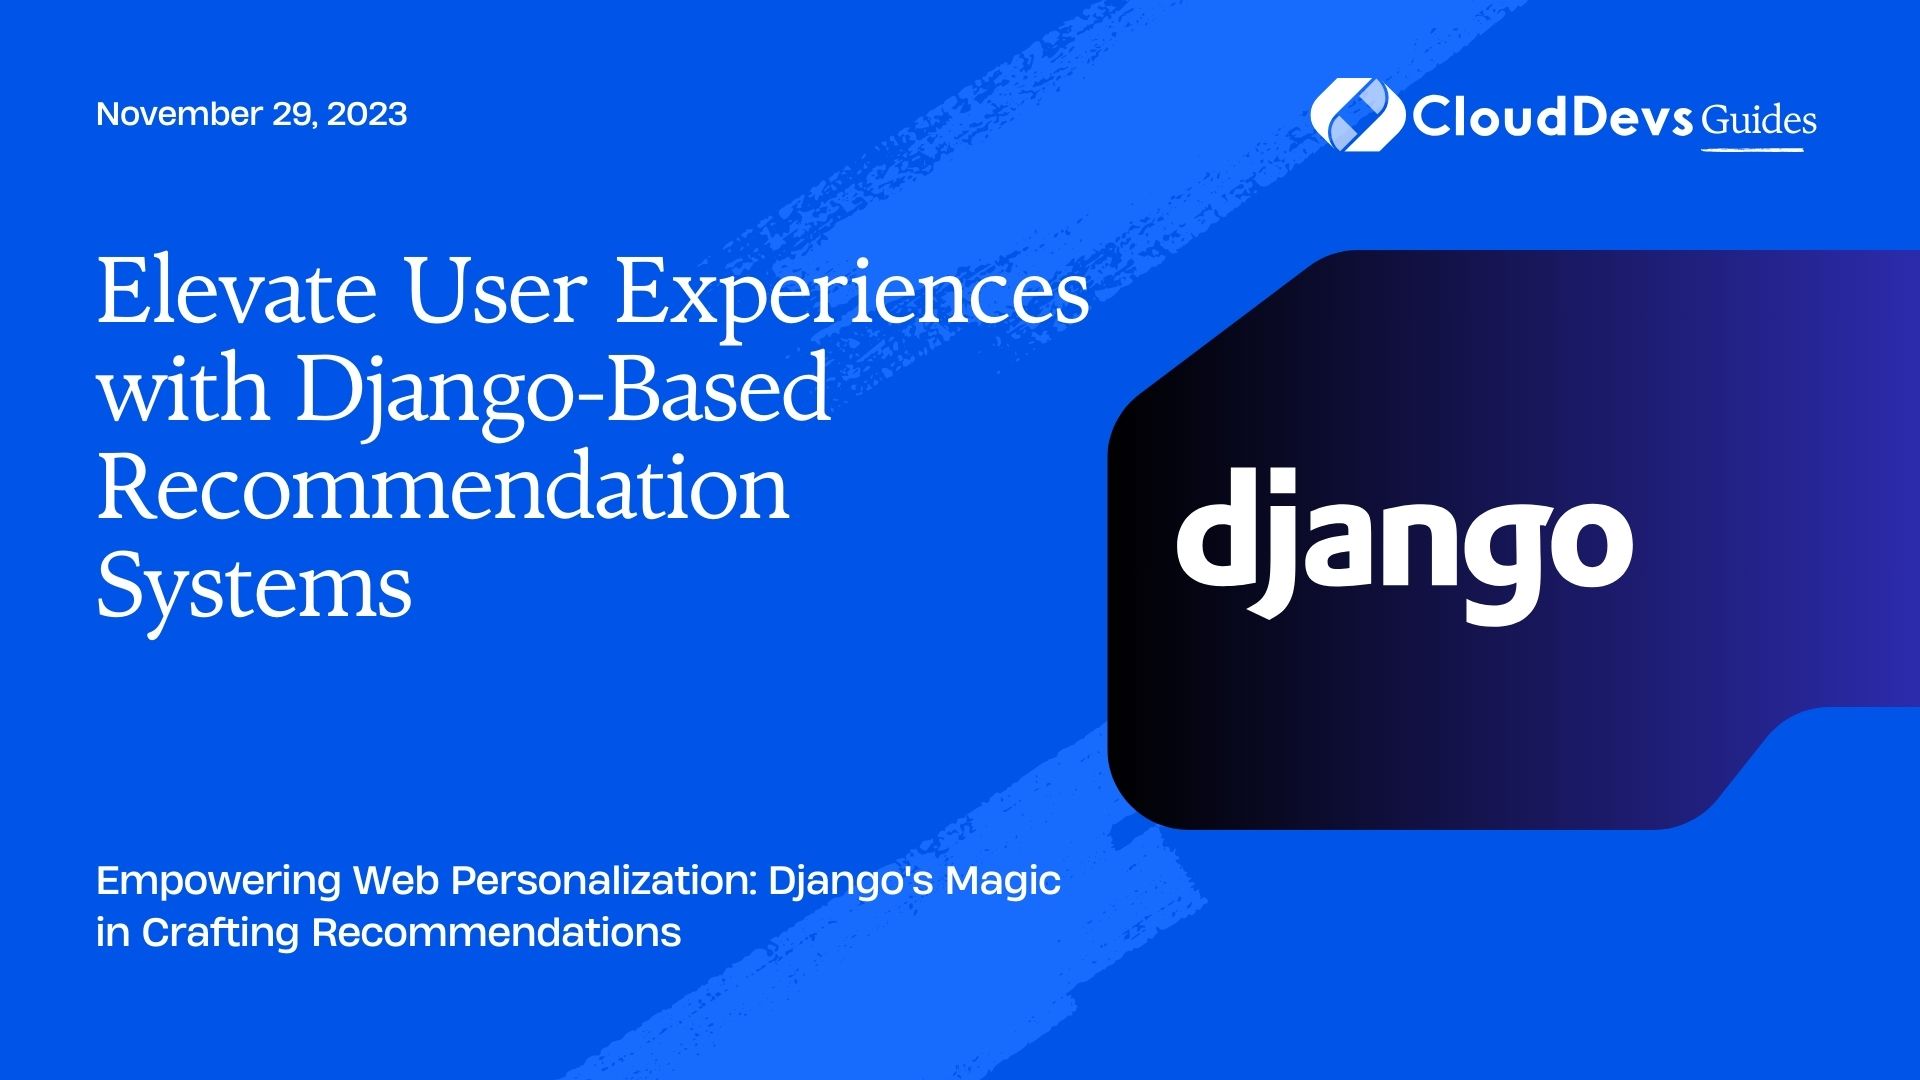 Elevate User Experiences with Django-Based Recommendation Systems